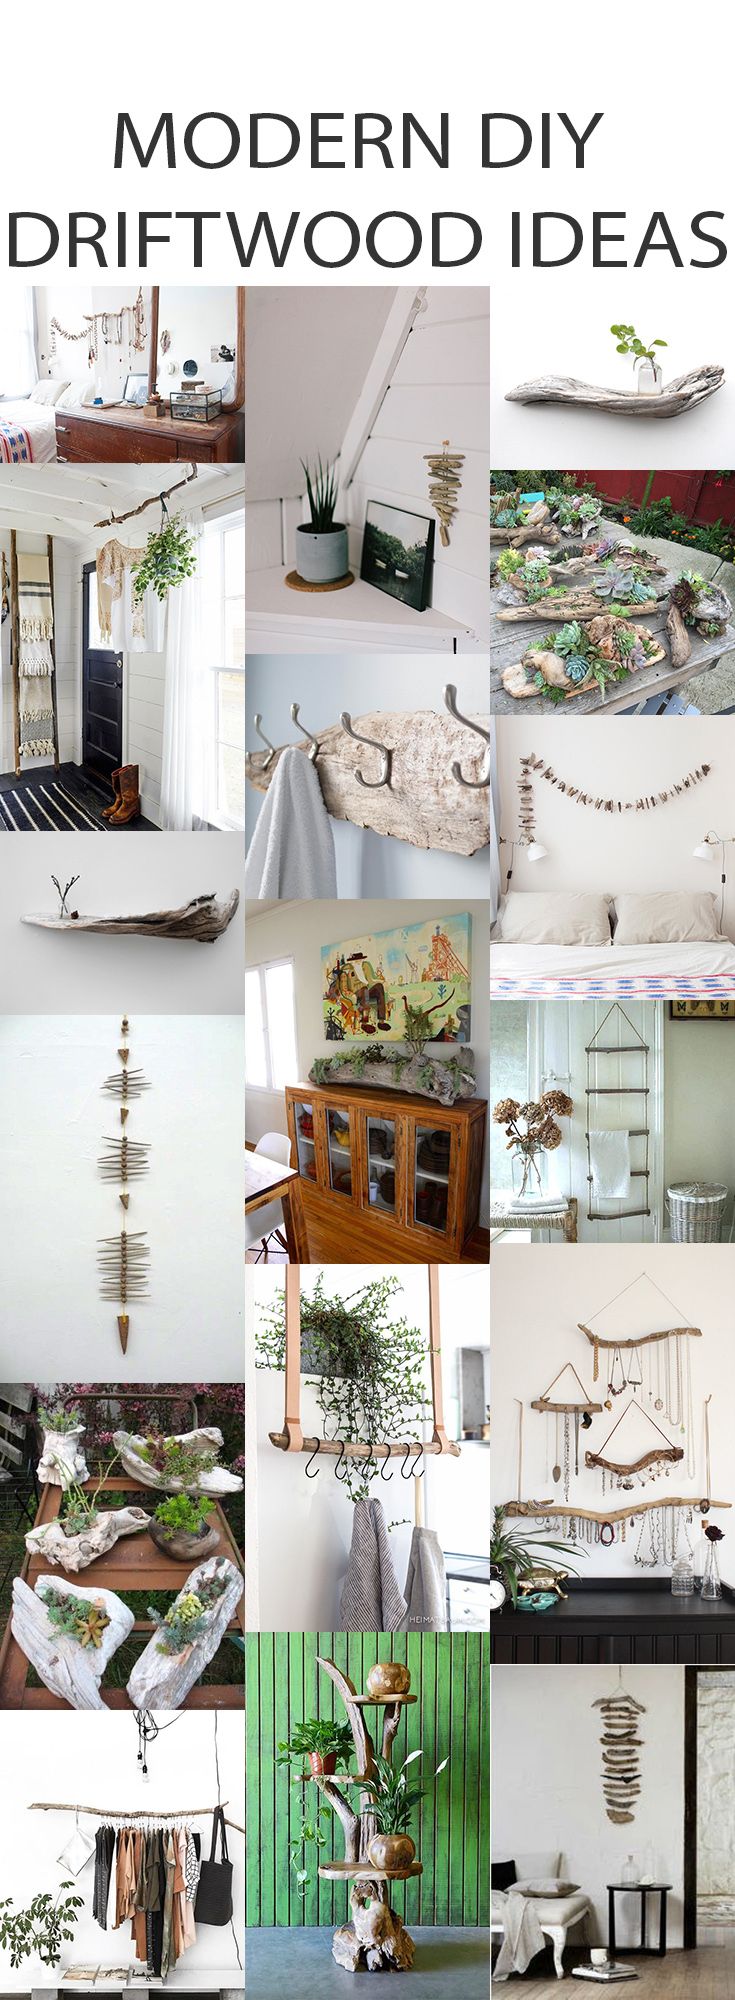 Ideas for ways to use driftwood that works with modern decor. #DIY #driftwood